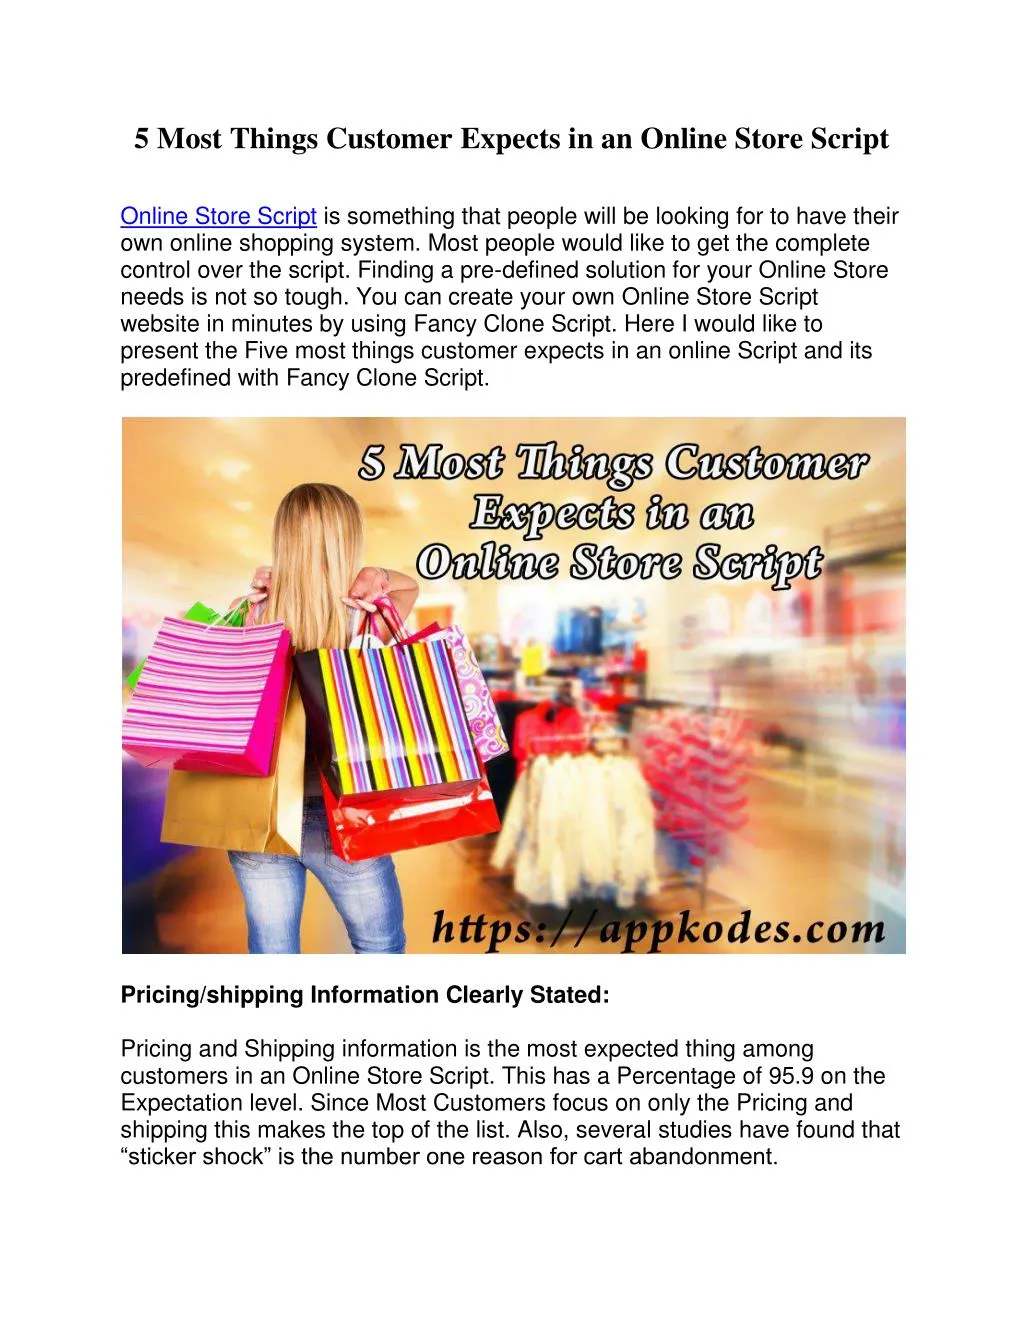 5 most things customer expects in an online store